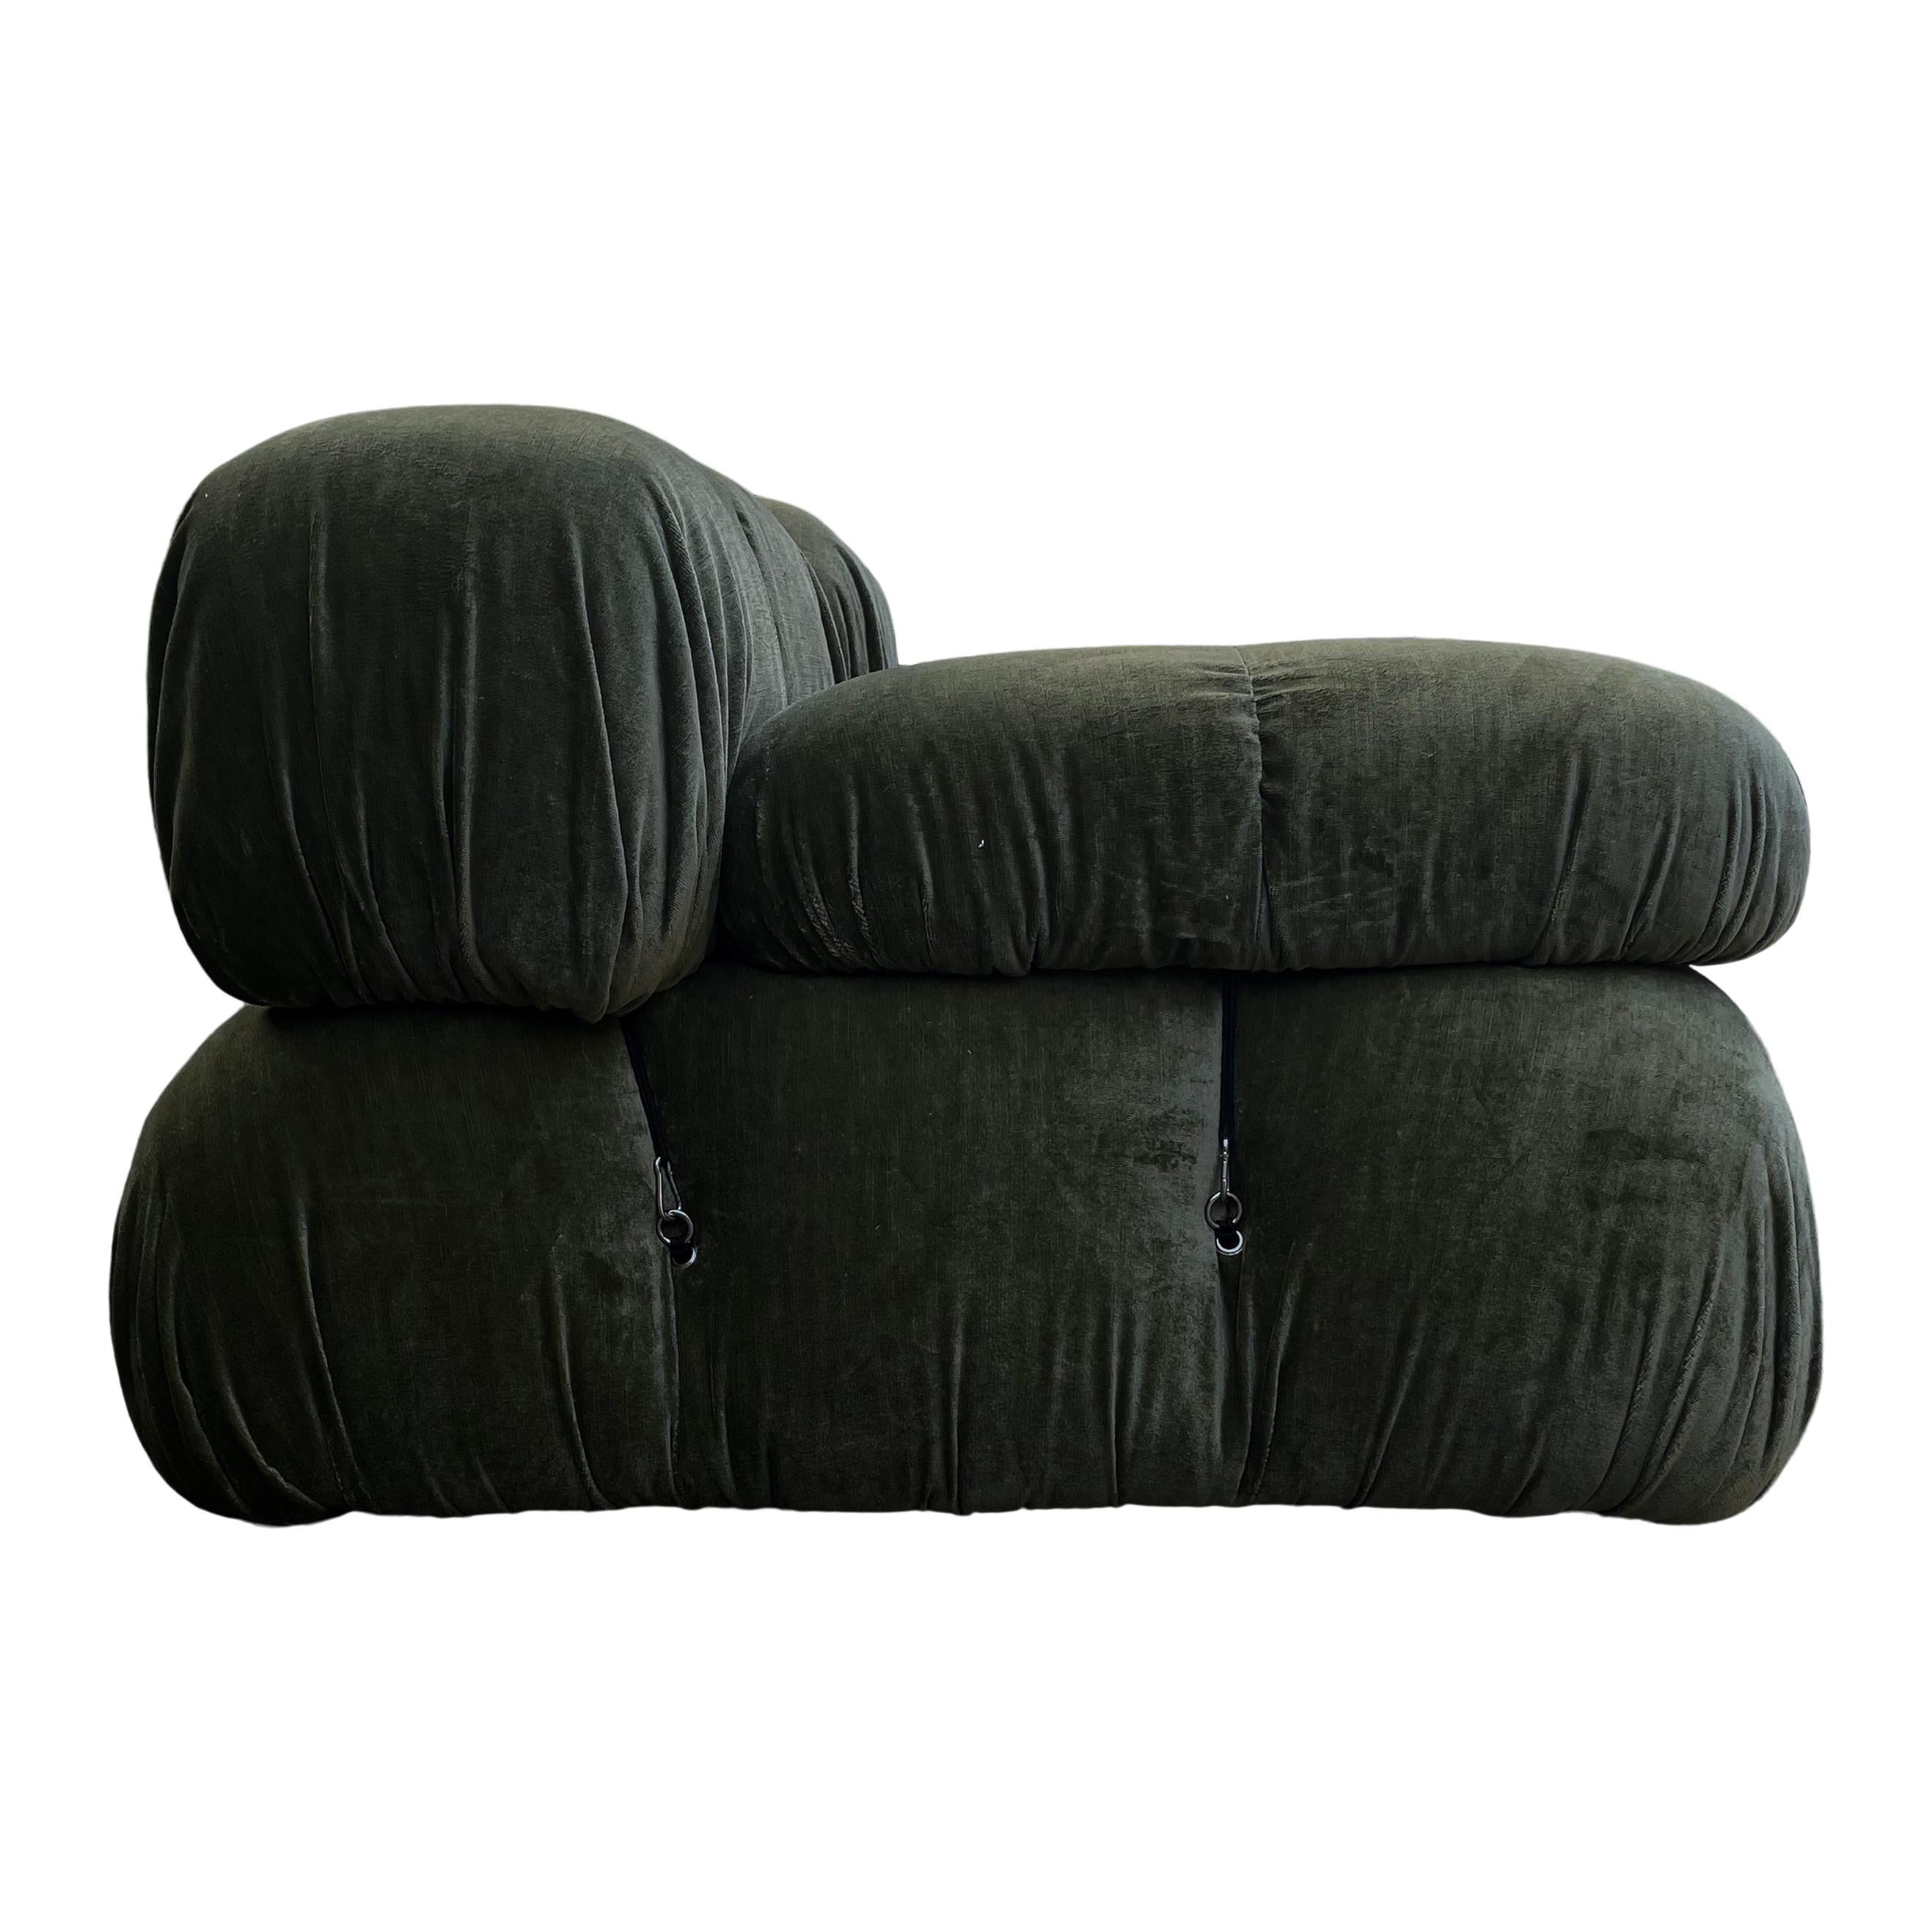 Camaleonda sofa, designed by Mario Bellini and manufactured by B&B Italia in 1972.
The set features two modules with backrest and two armrests.
Green linen velvet upholstery.

Fully restored in Italy.

Dimensions:
Big Modules: H 67 cm x W 92